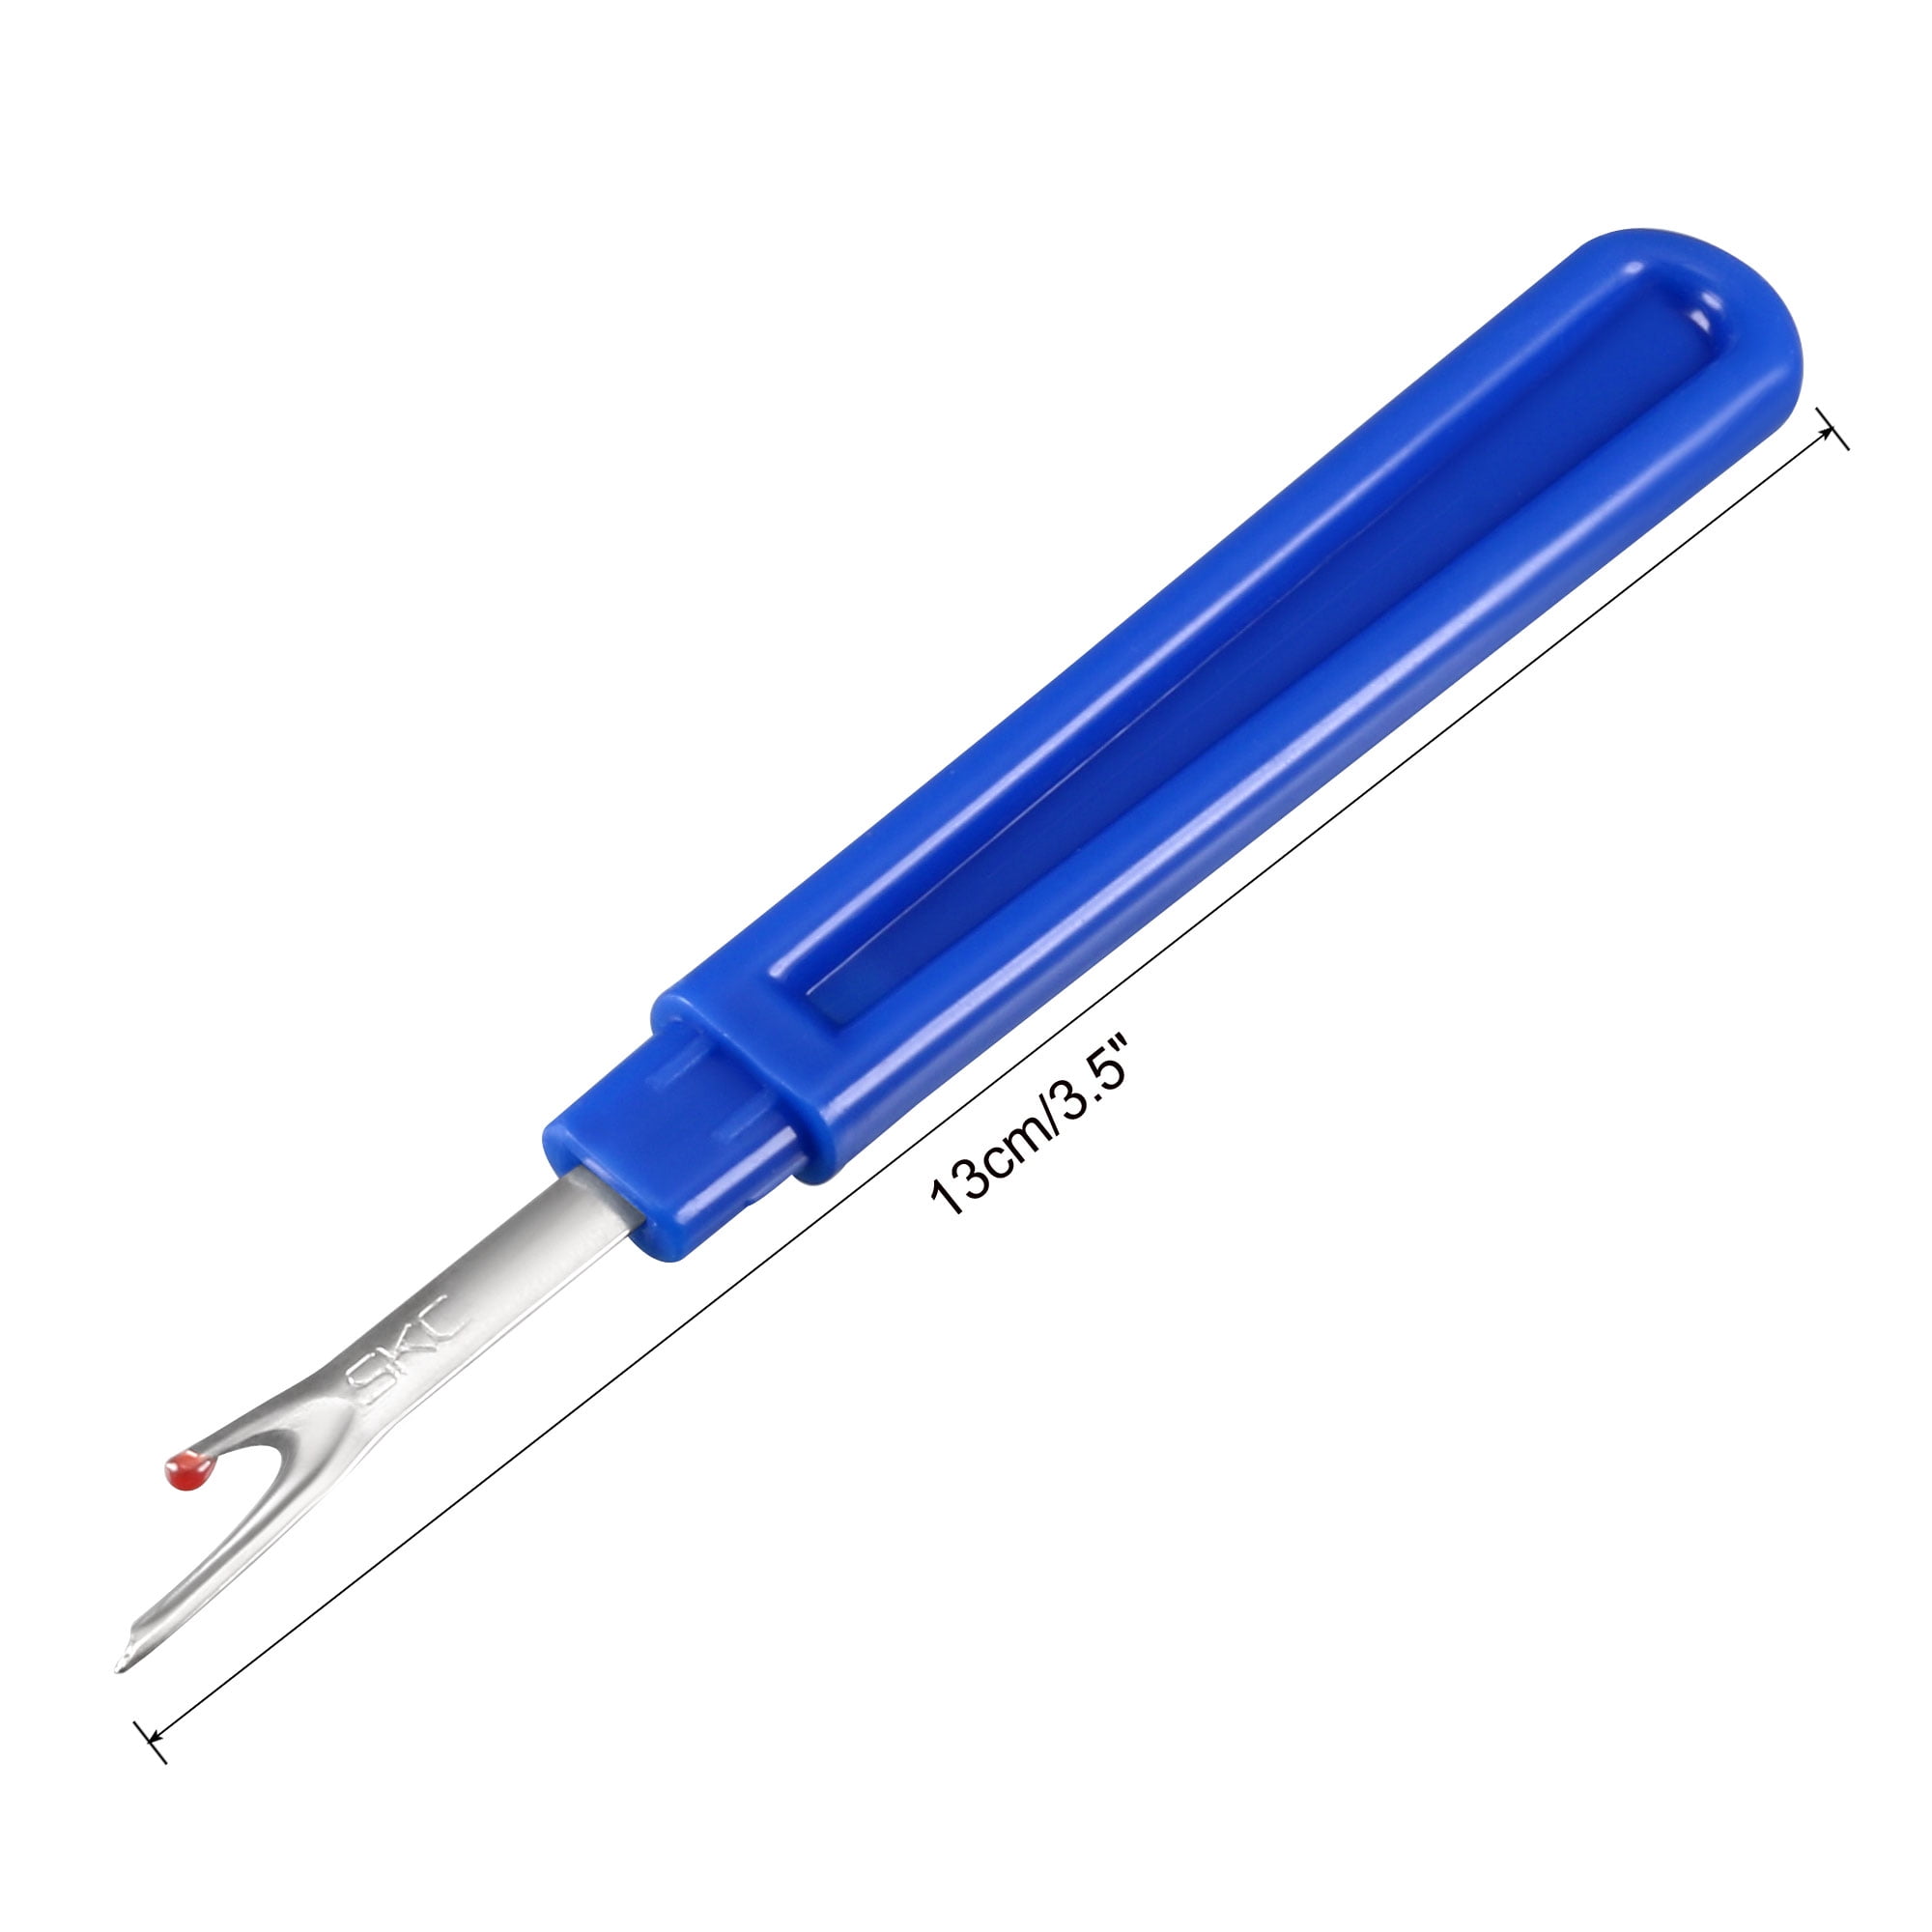 Cordless Seam Ripper, Stitch And Embroidery Removal Tool (8580SE